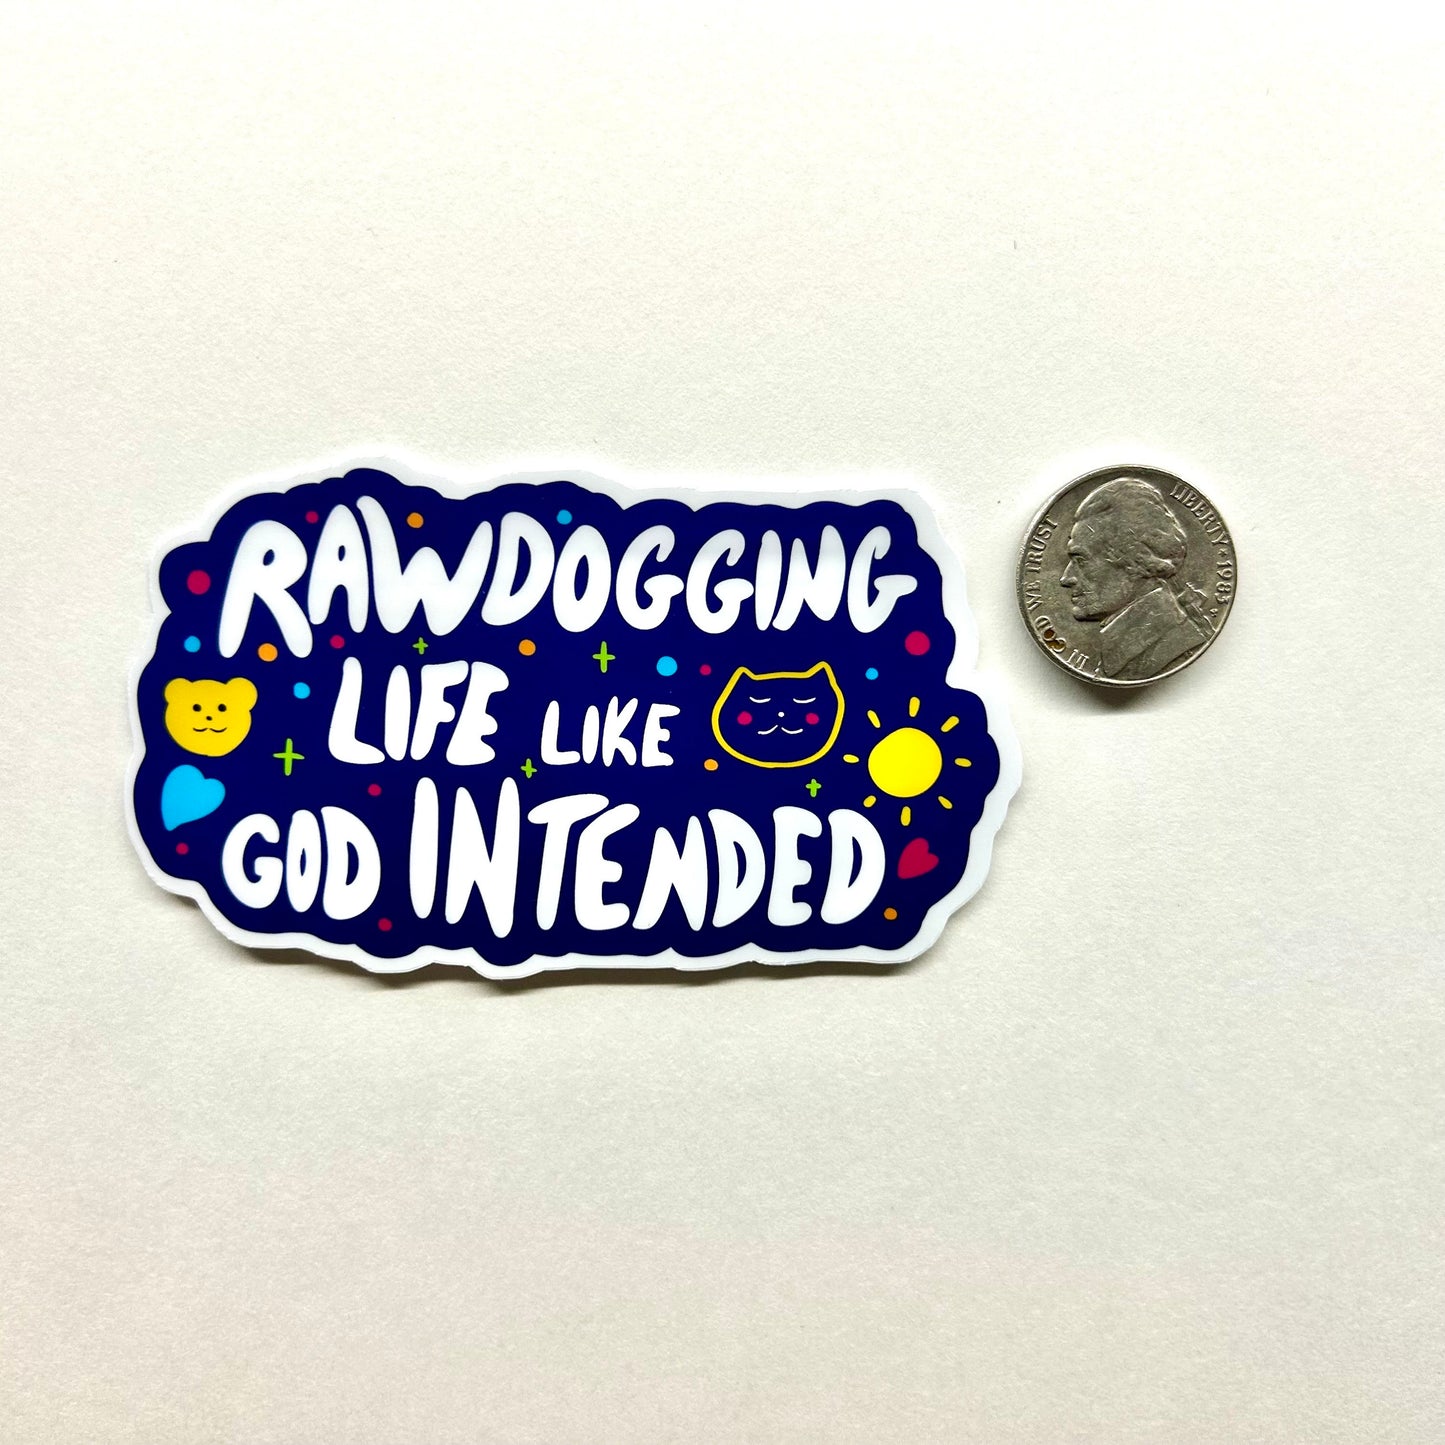 Rawdogging Life Like God Intended - Meme Sticker - Perfect for Laptops and Notebooks, Unique Gift for Sticker Lovers